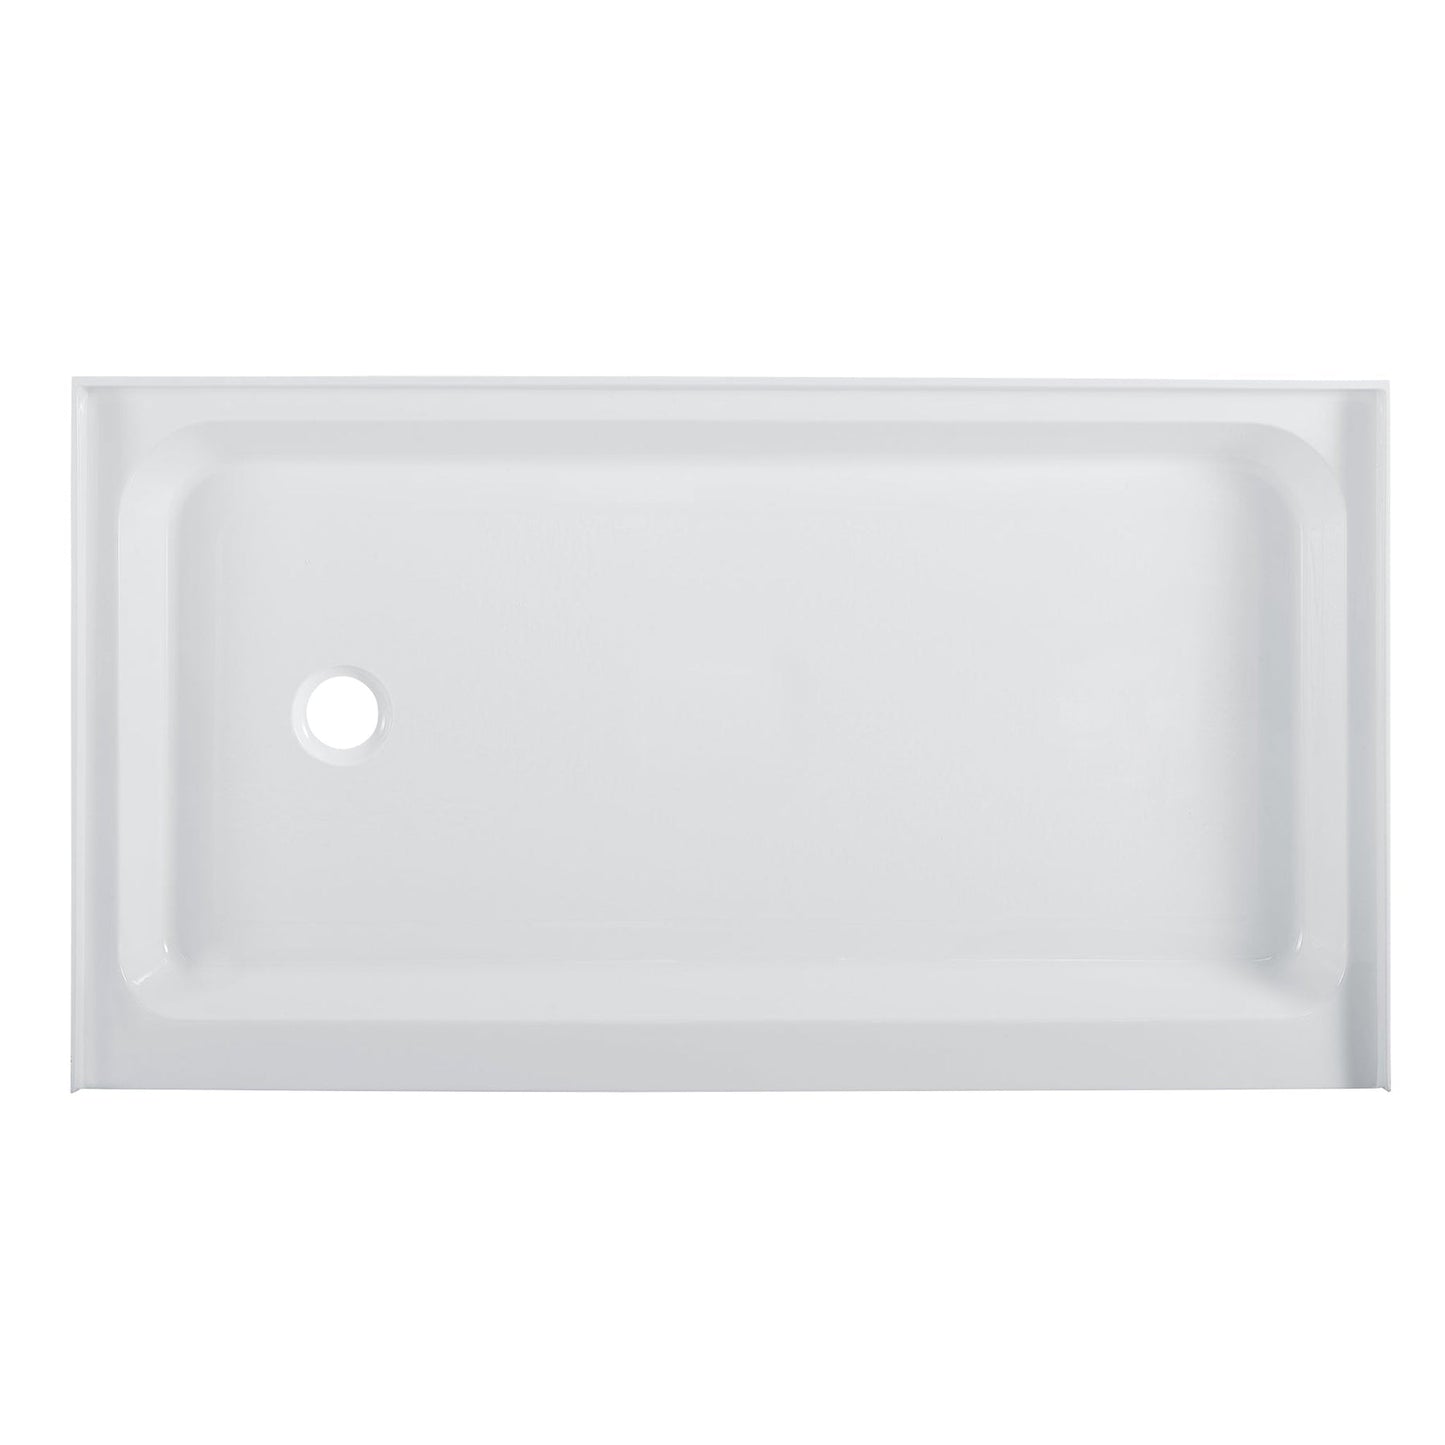 Swiss Madison Voltaire 60" x 36" Three-Wall Alcove White Left-Hand Drain Shower Base With Built-In Integral Flange